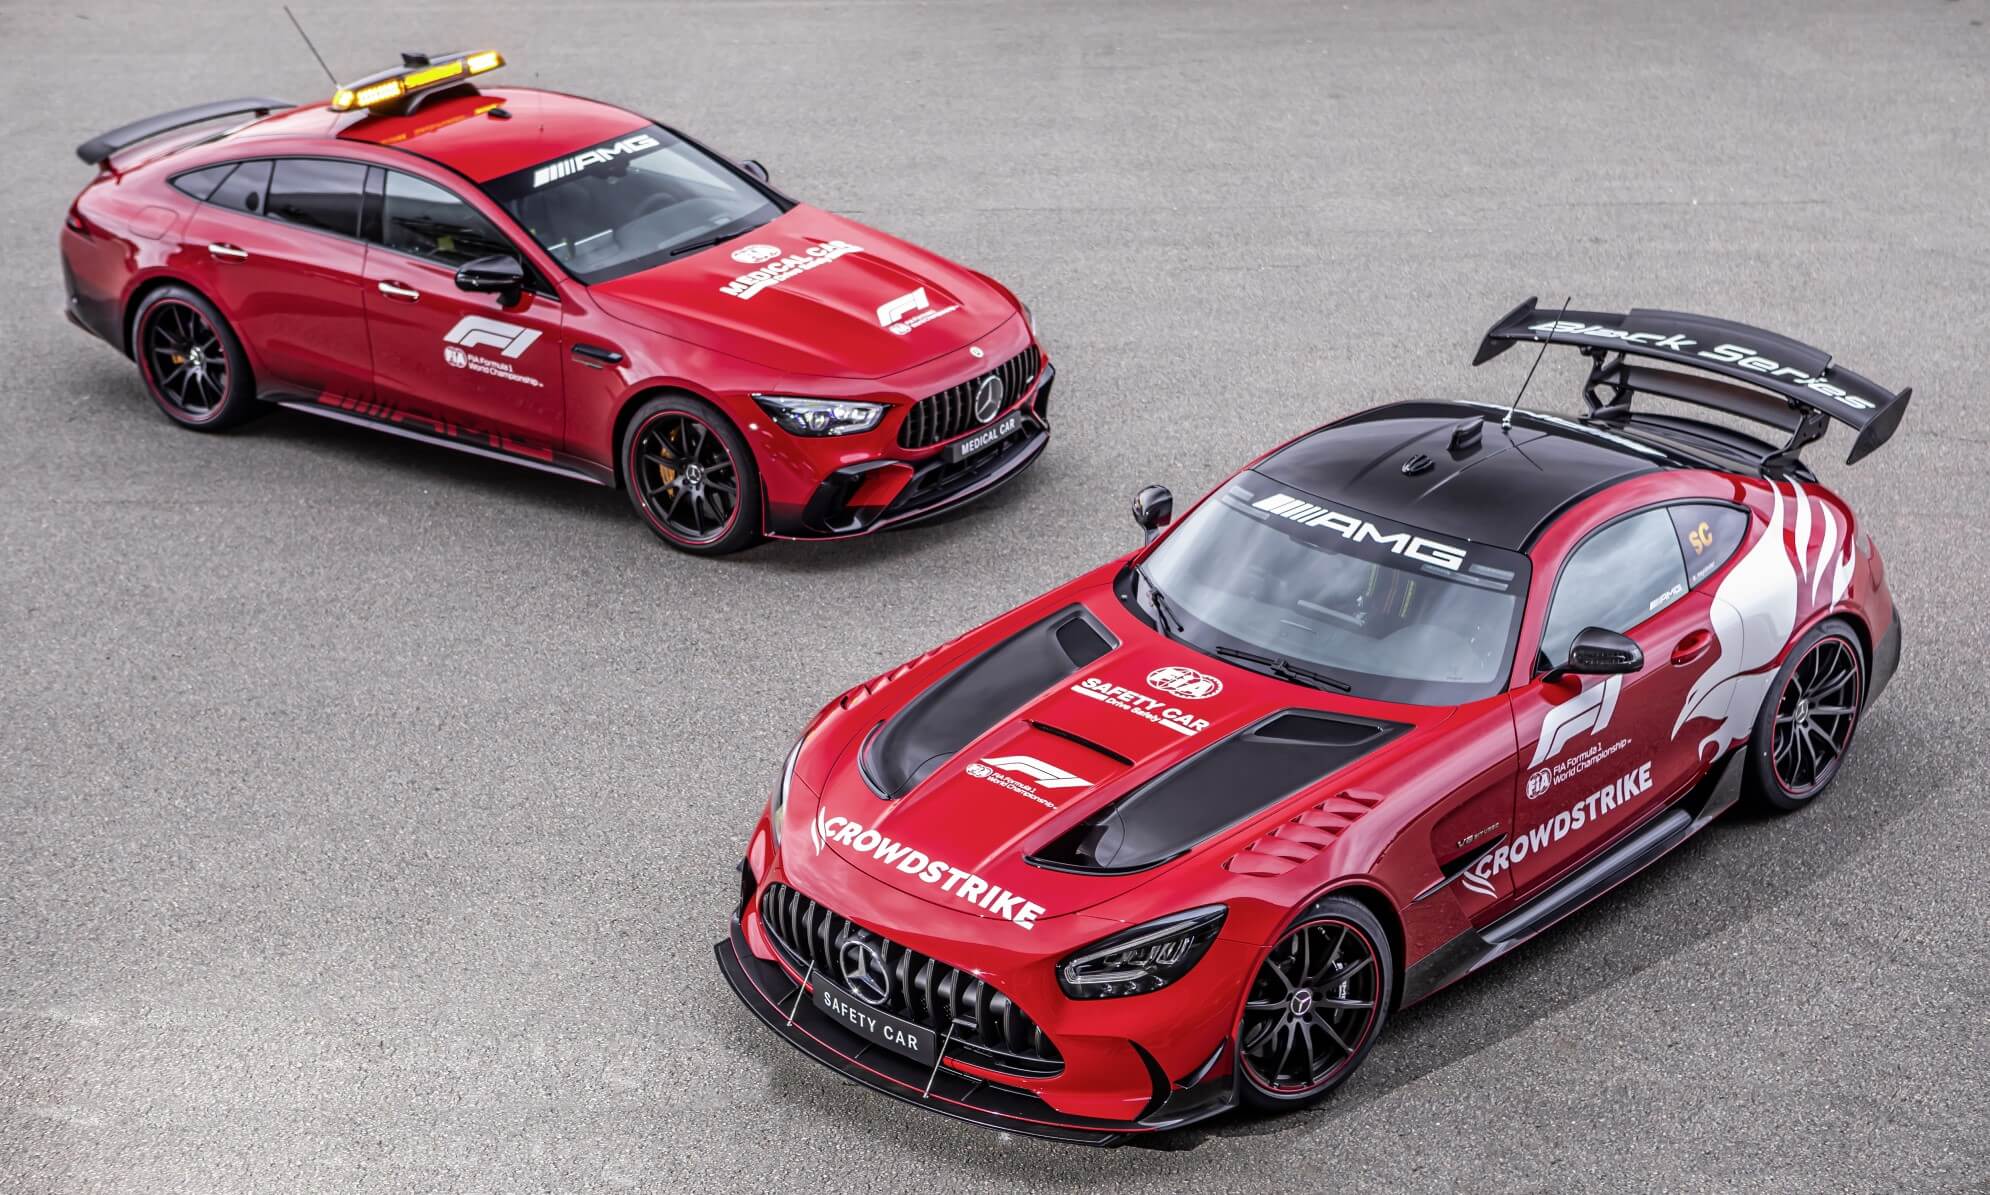 New Mercedes-AMG F1 Safety and Medical Cars (2)